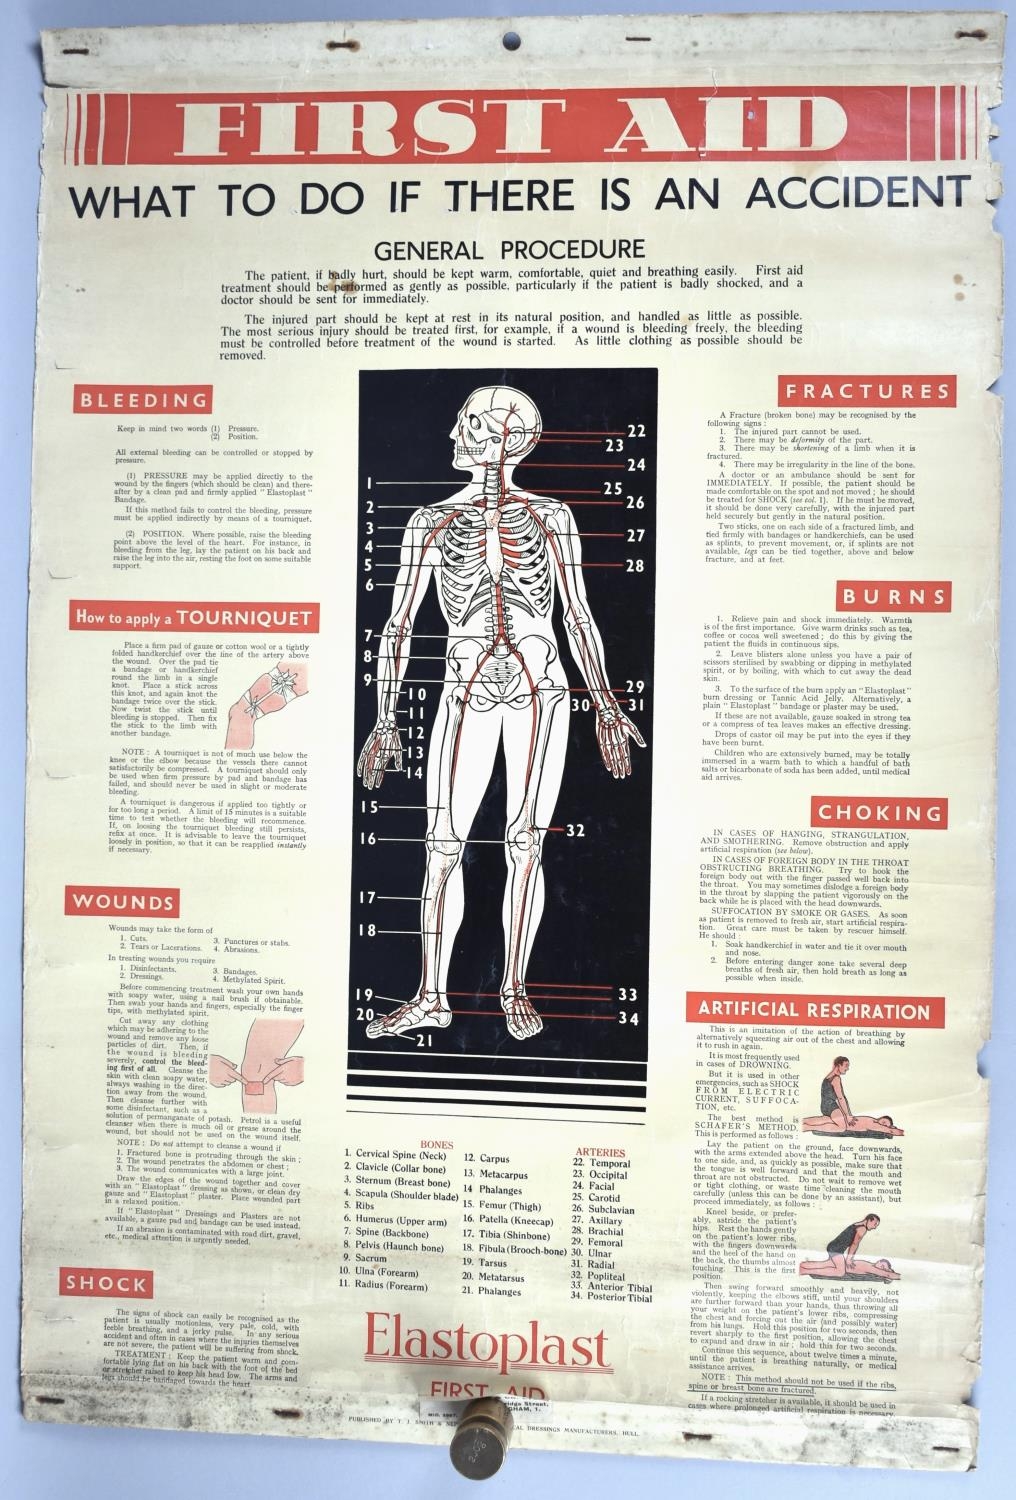 A Vintage First Aid Poster, What Do Do If There Is An Accident, Published by TJ Smith and Nephew